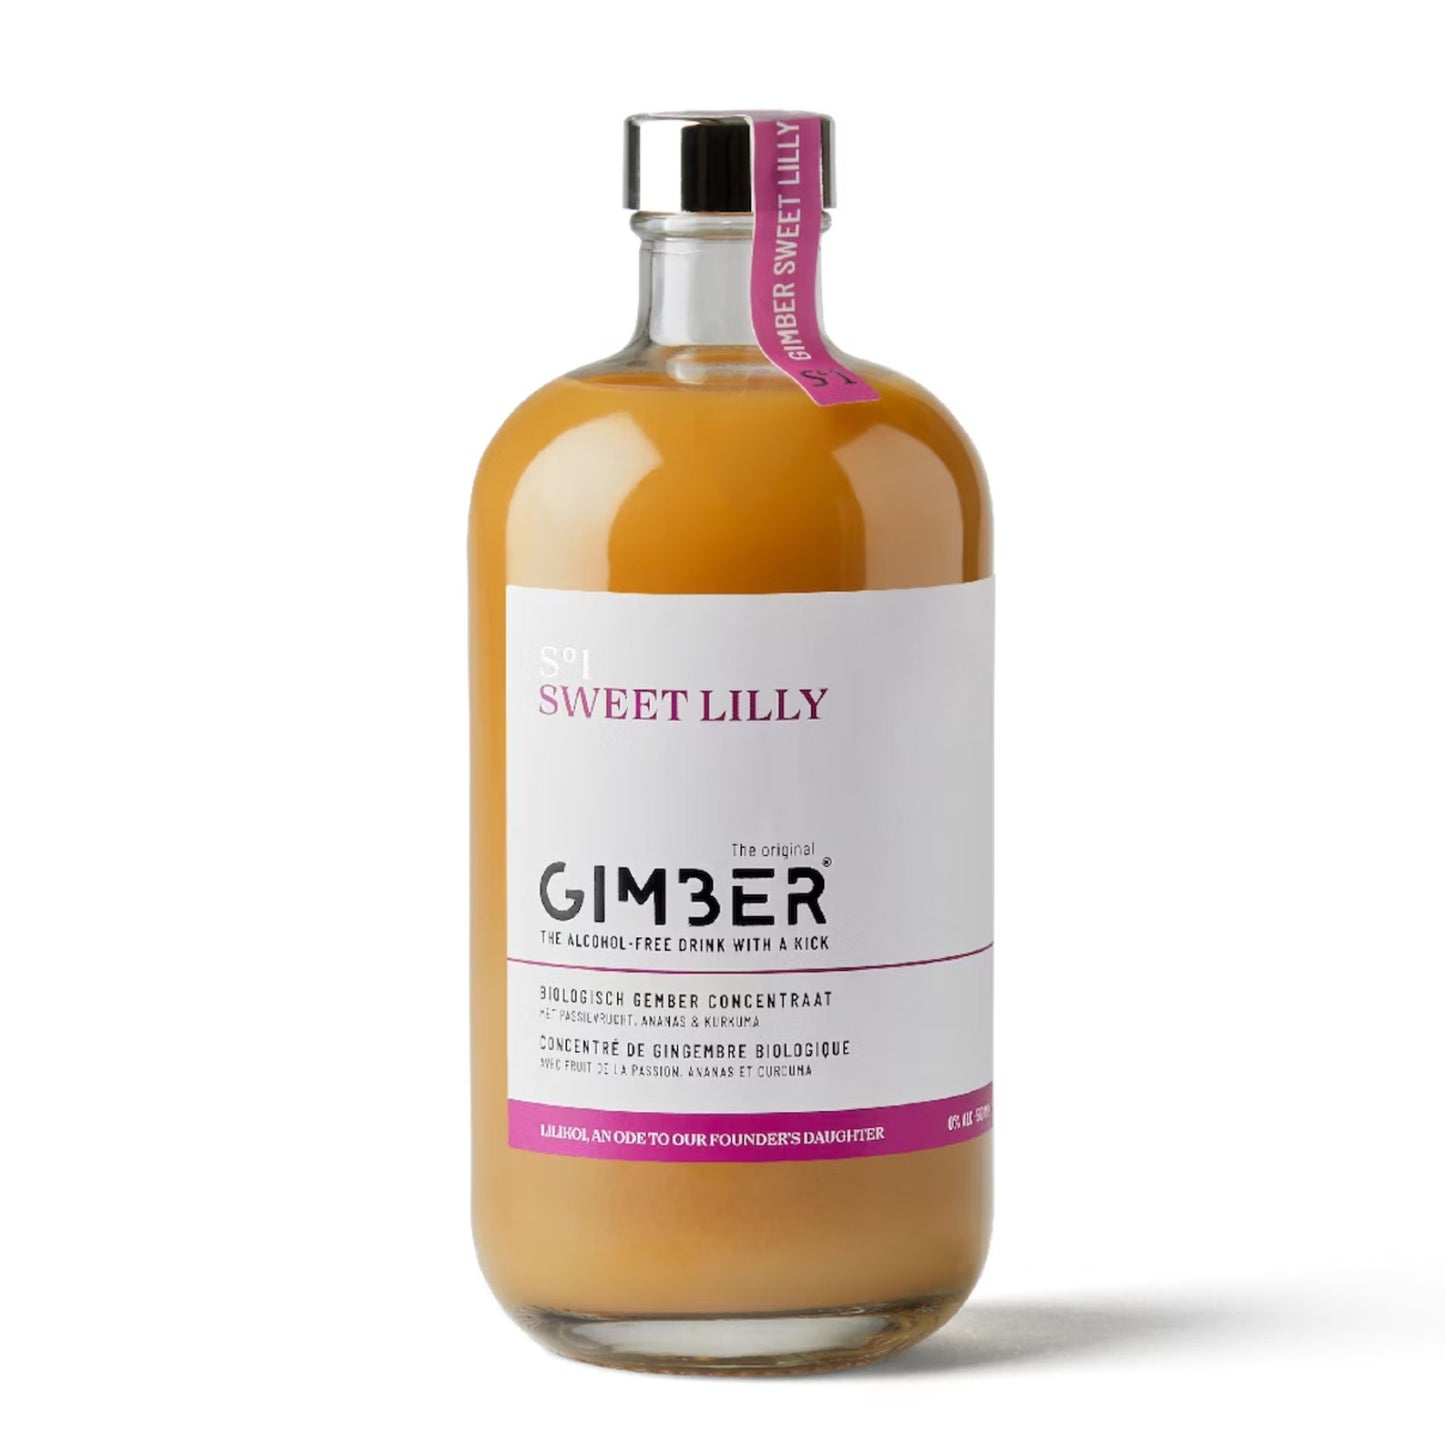 Gimber Sweet Lilly is available at Knyota Non-Alcoholic Drinks.